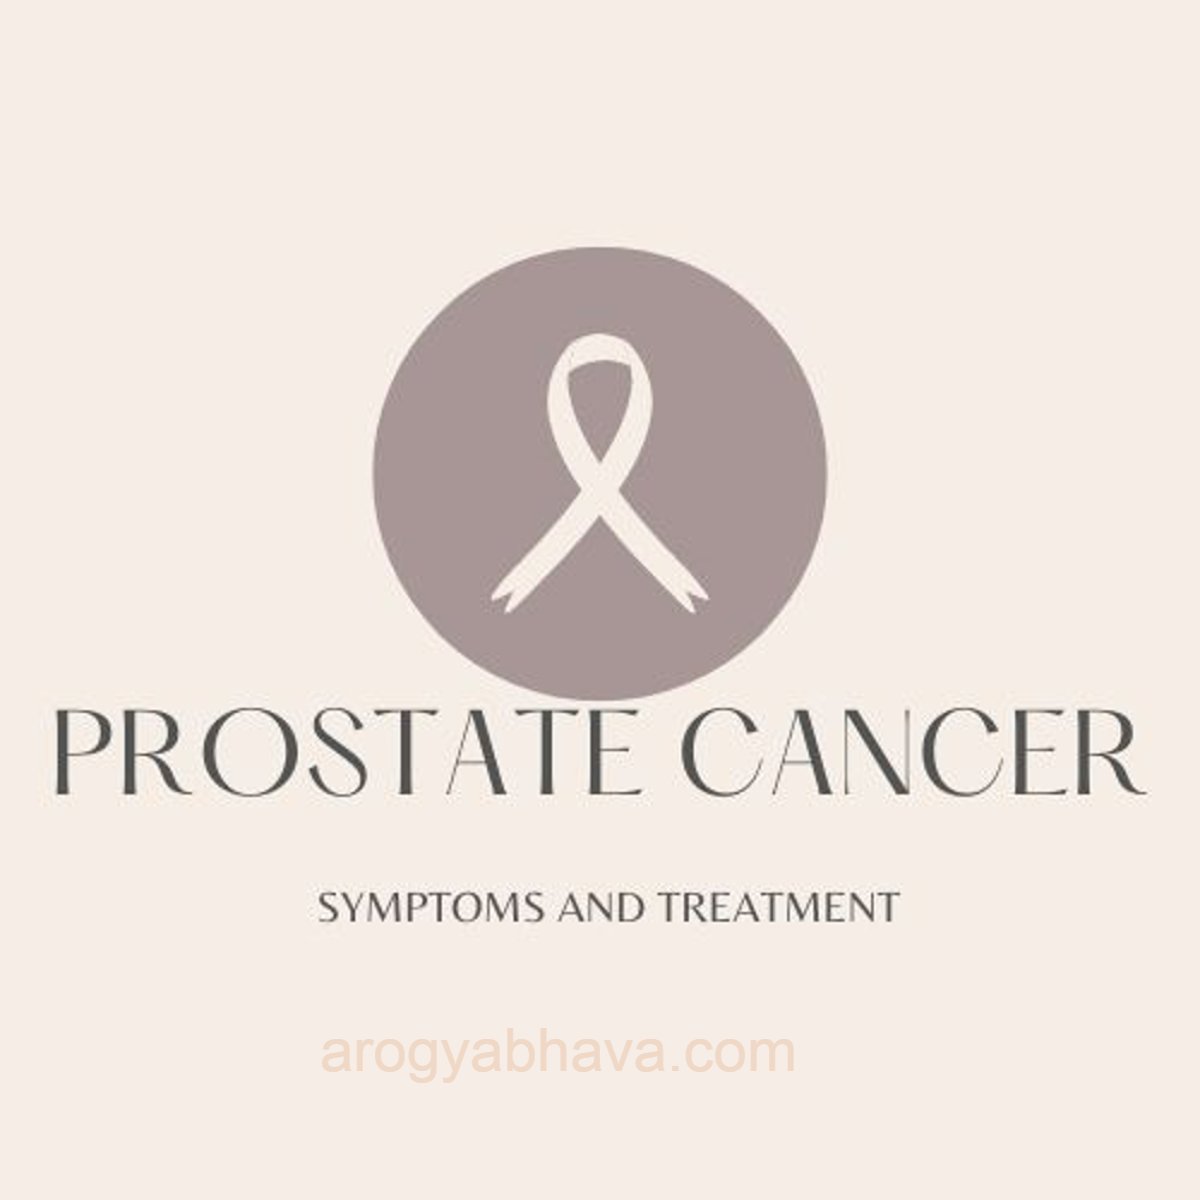 Prostate Cancer: Symptoms and Treatment